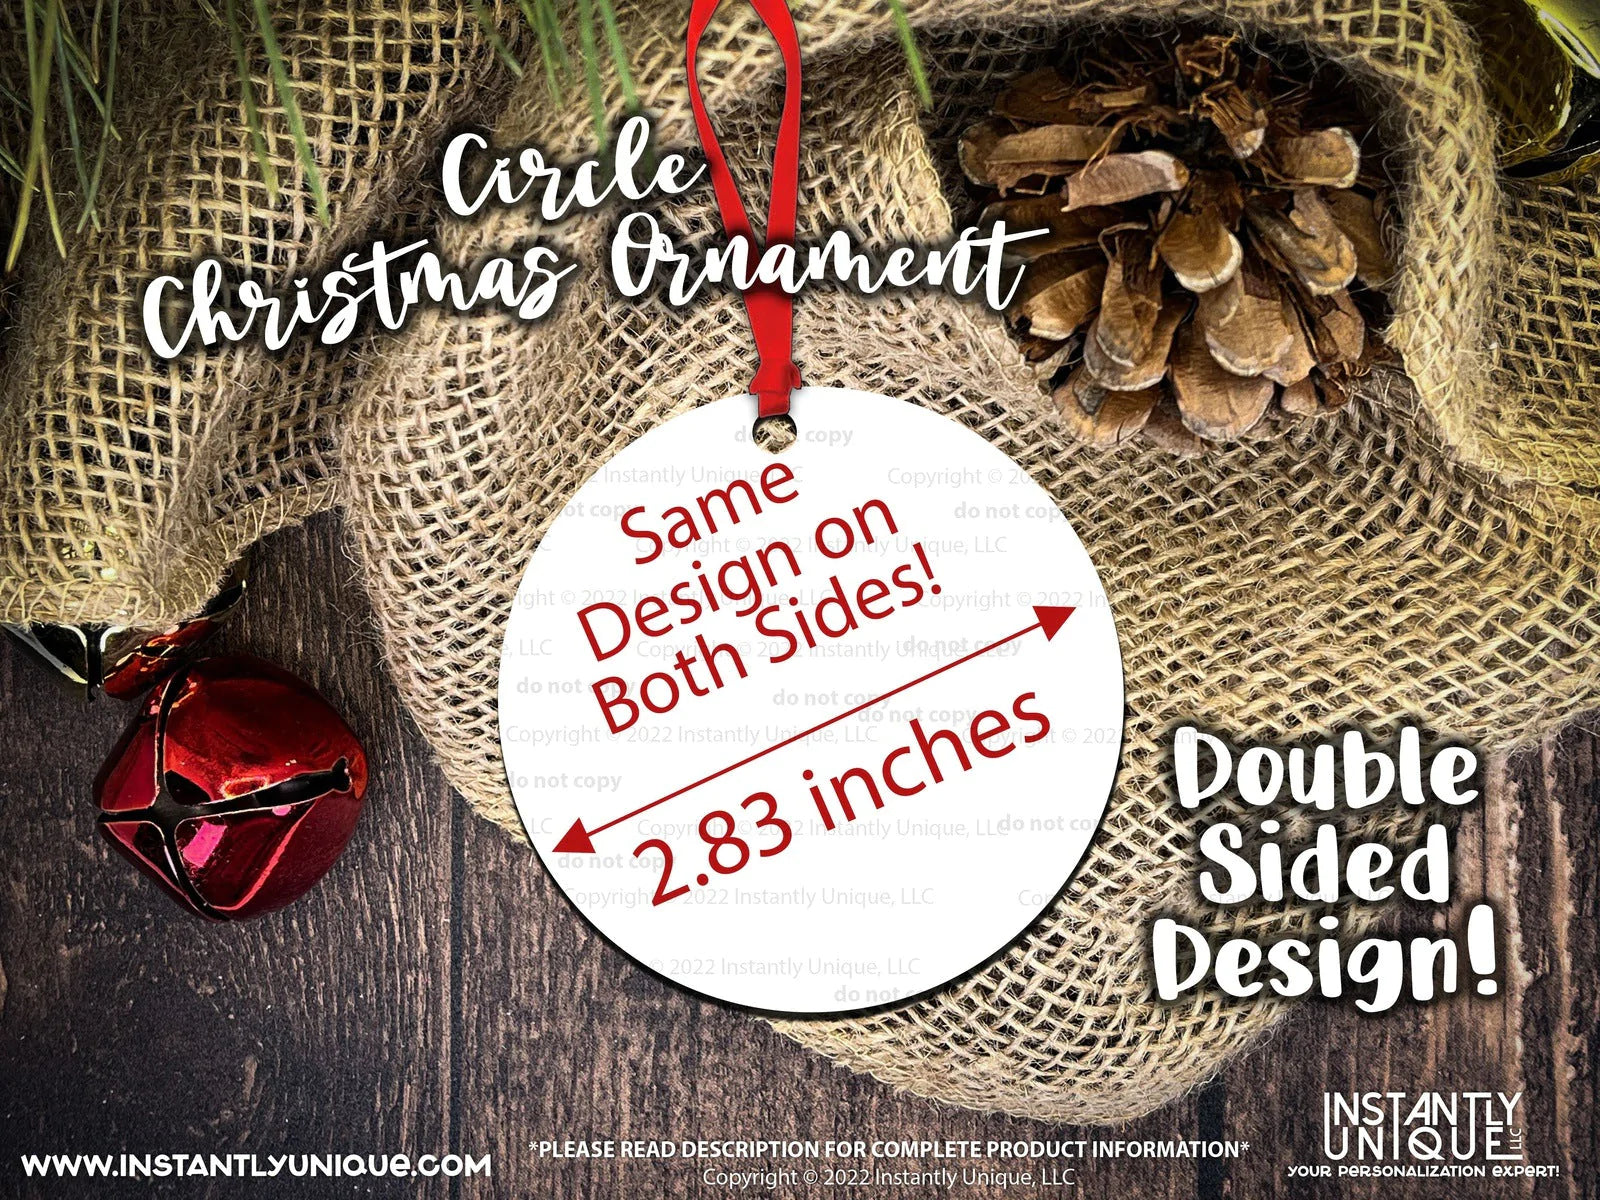 Our First Home - Established 2022 - Double Sided Wooden Ornament